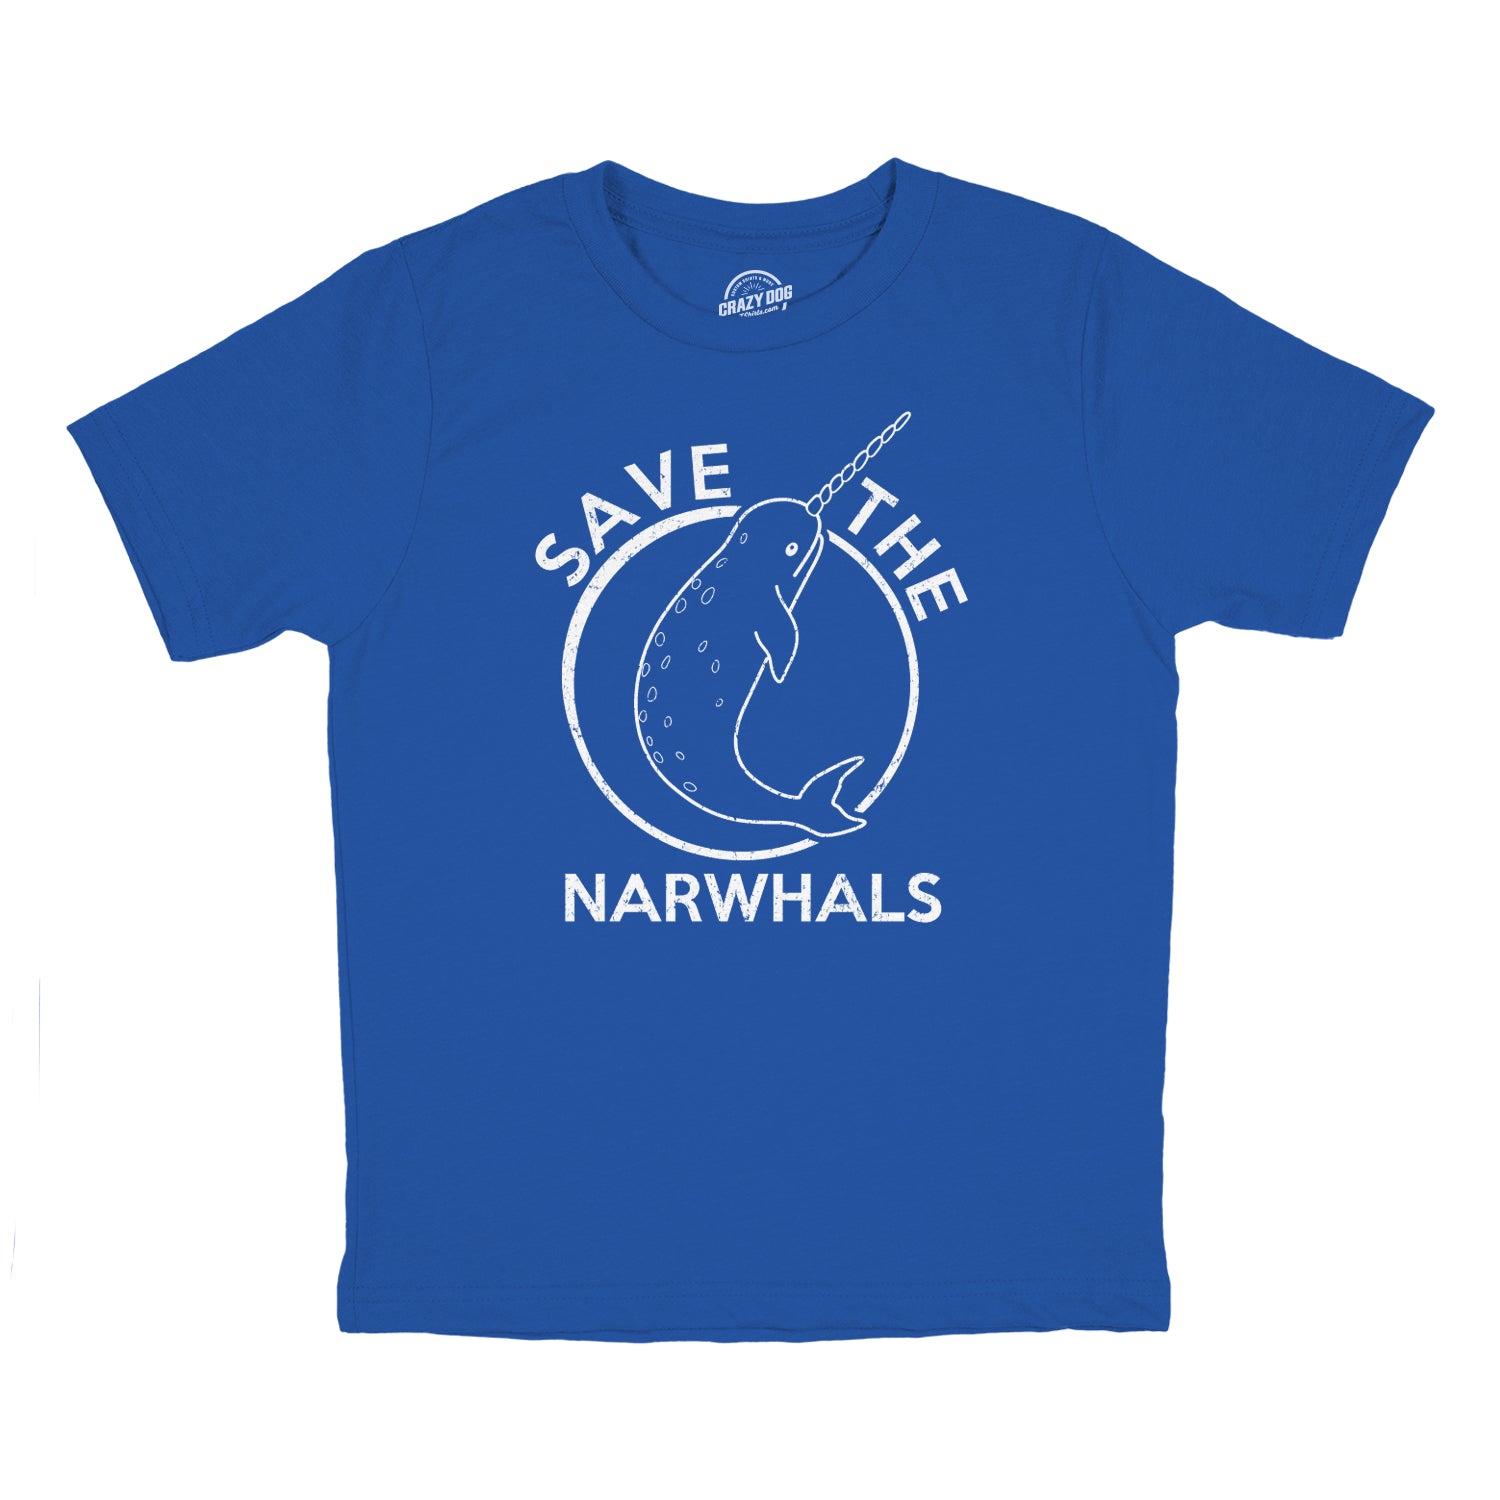 Funny Royal Save The Narwhals Youth T Shirt Nerdy Animal Unicorn earth Tee